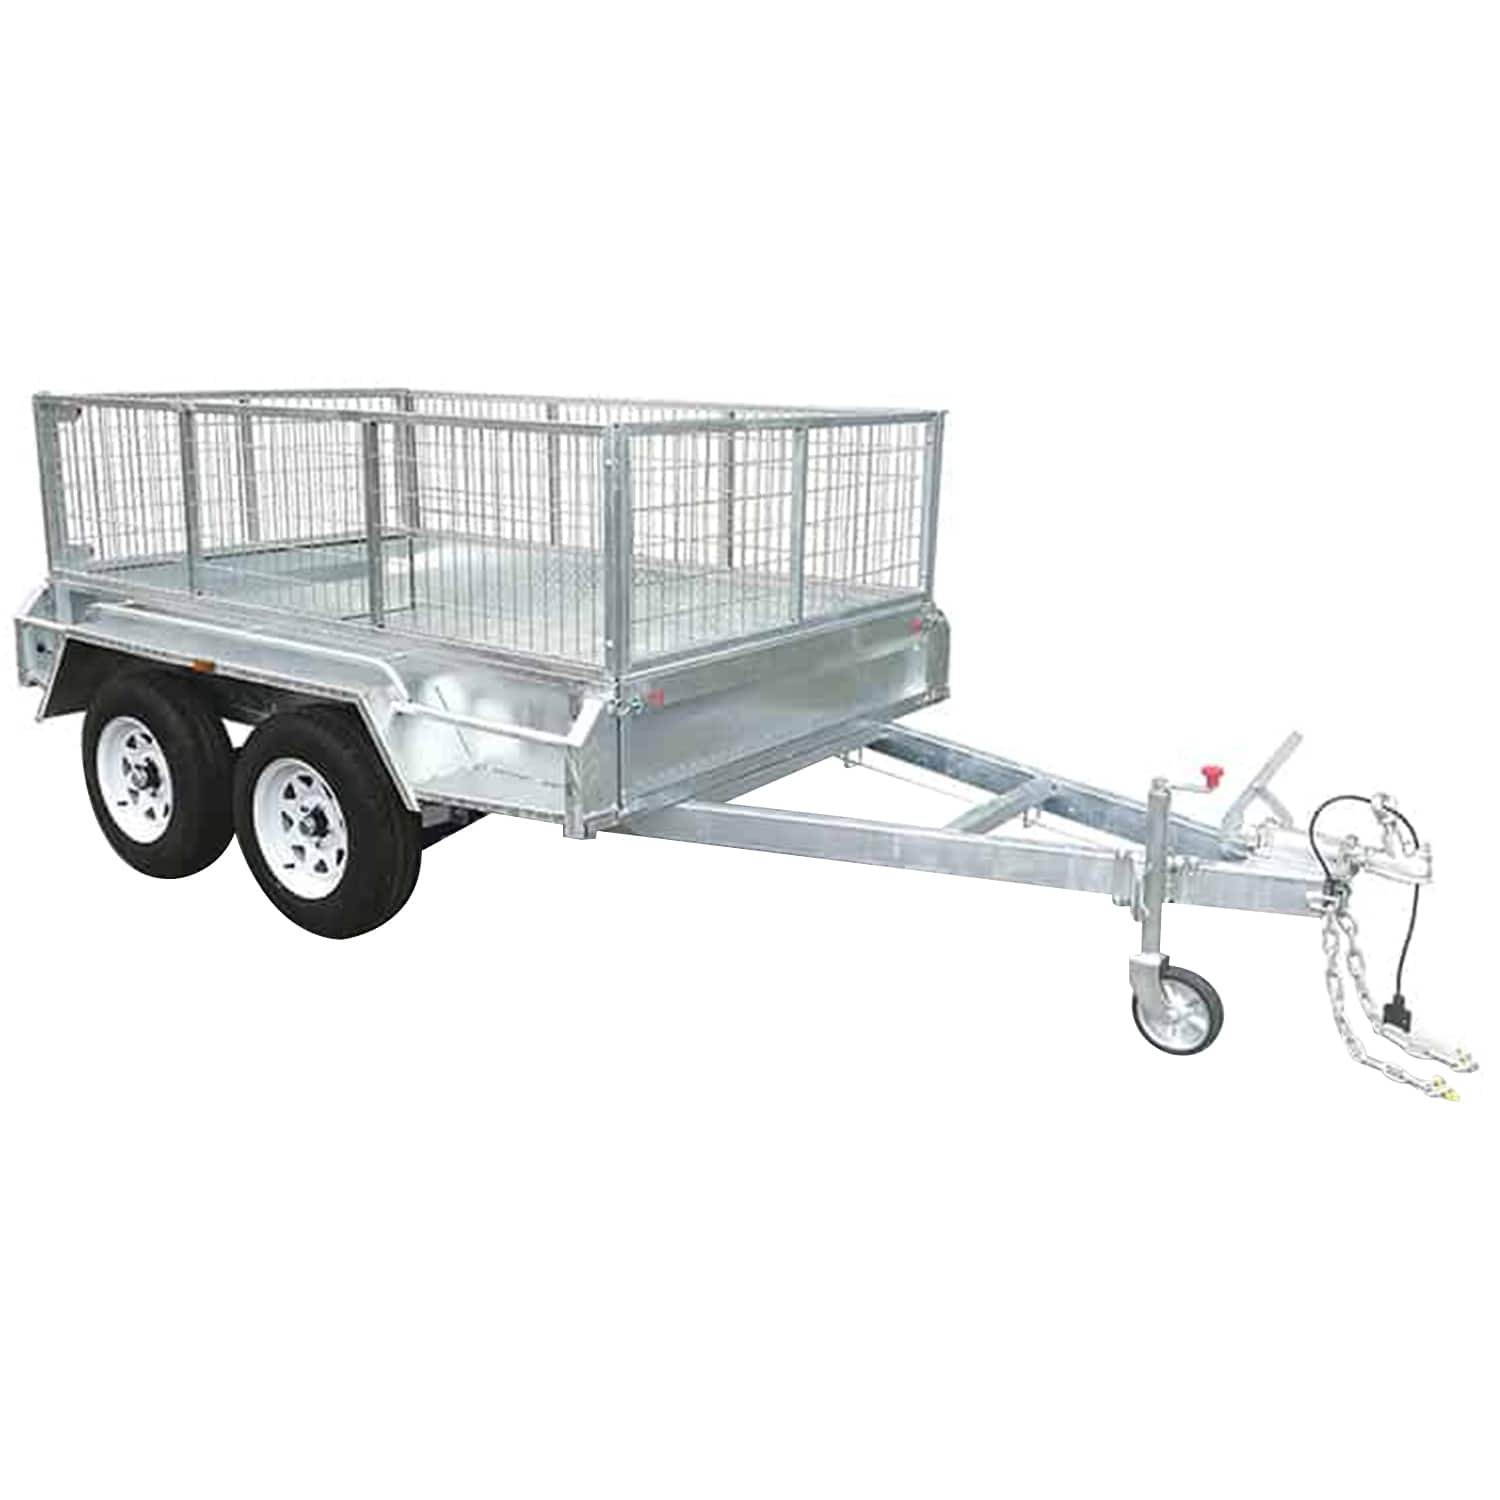 Exploring the Versatility and Benefits of 8x5 Tandem Trailers - SooperTrend